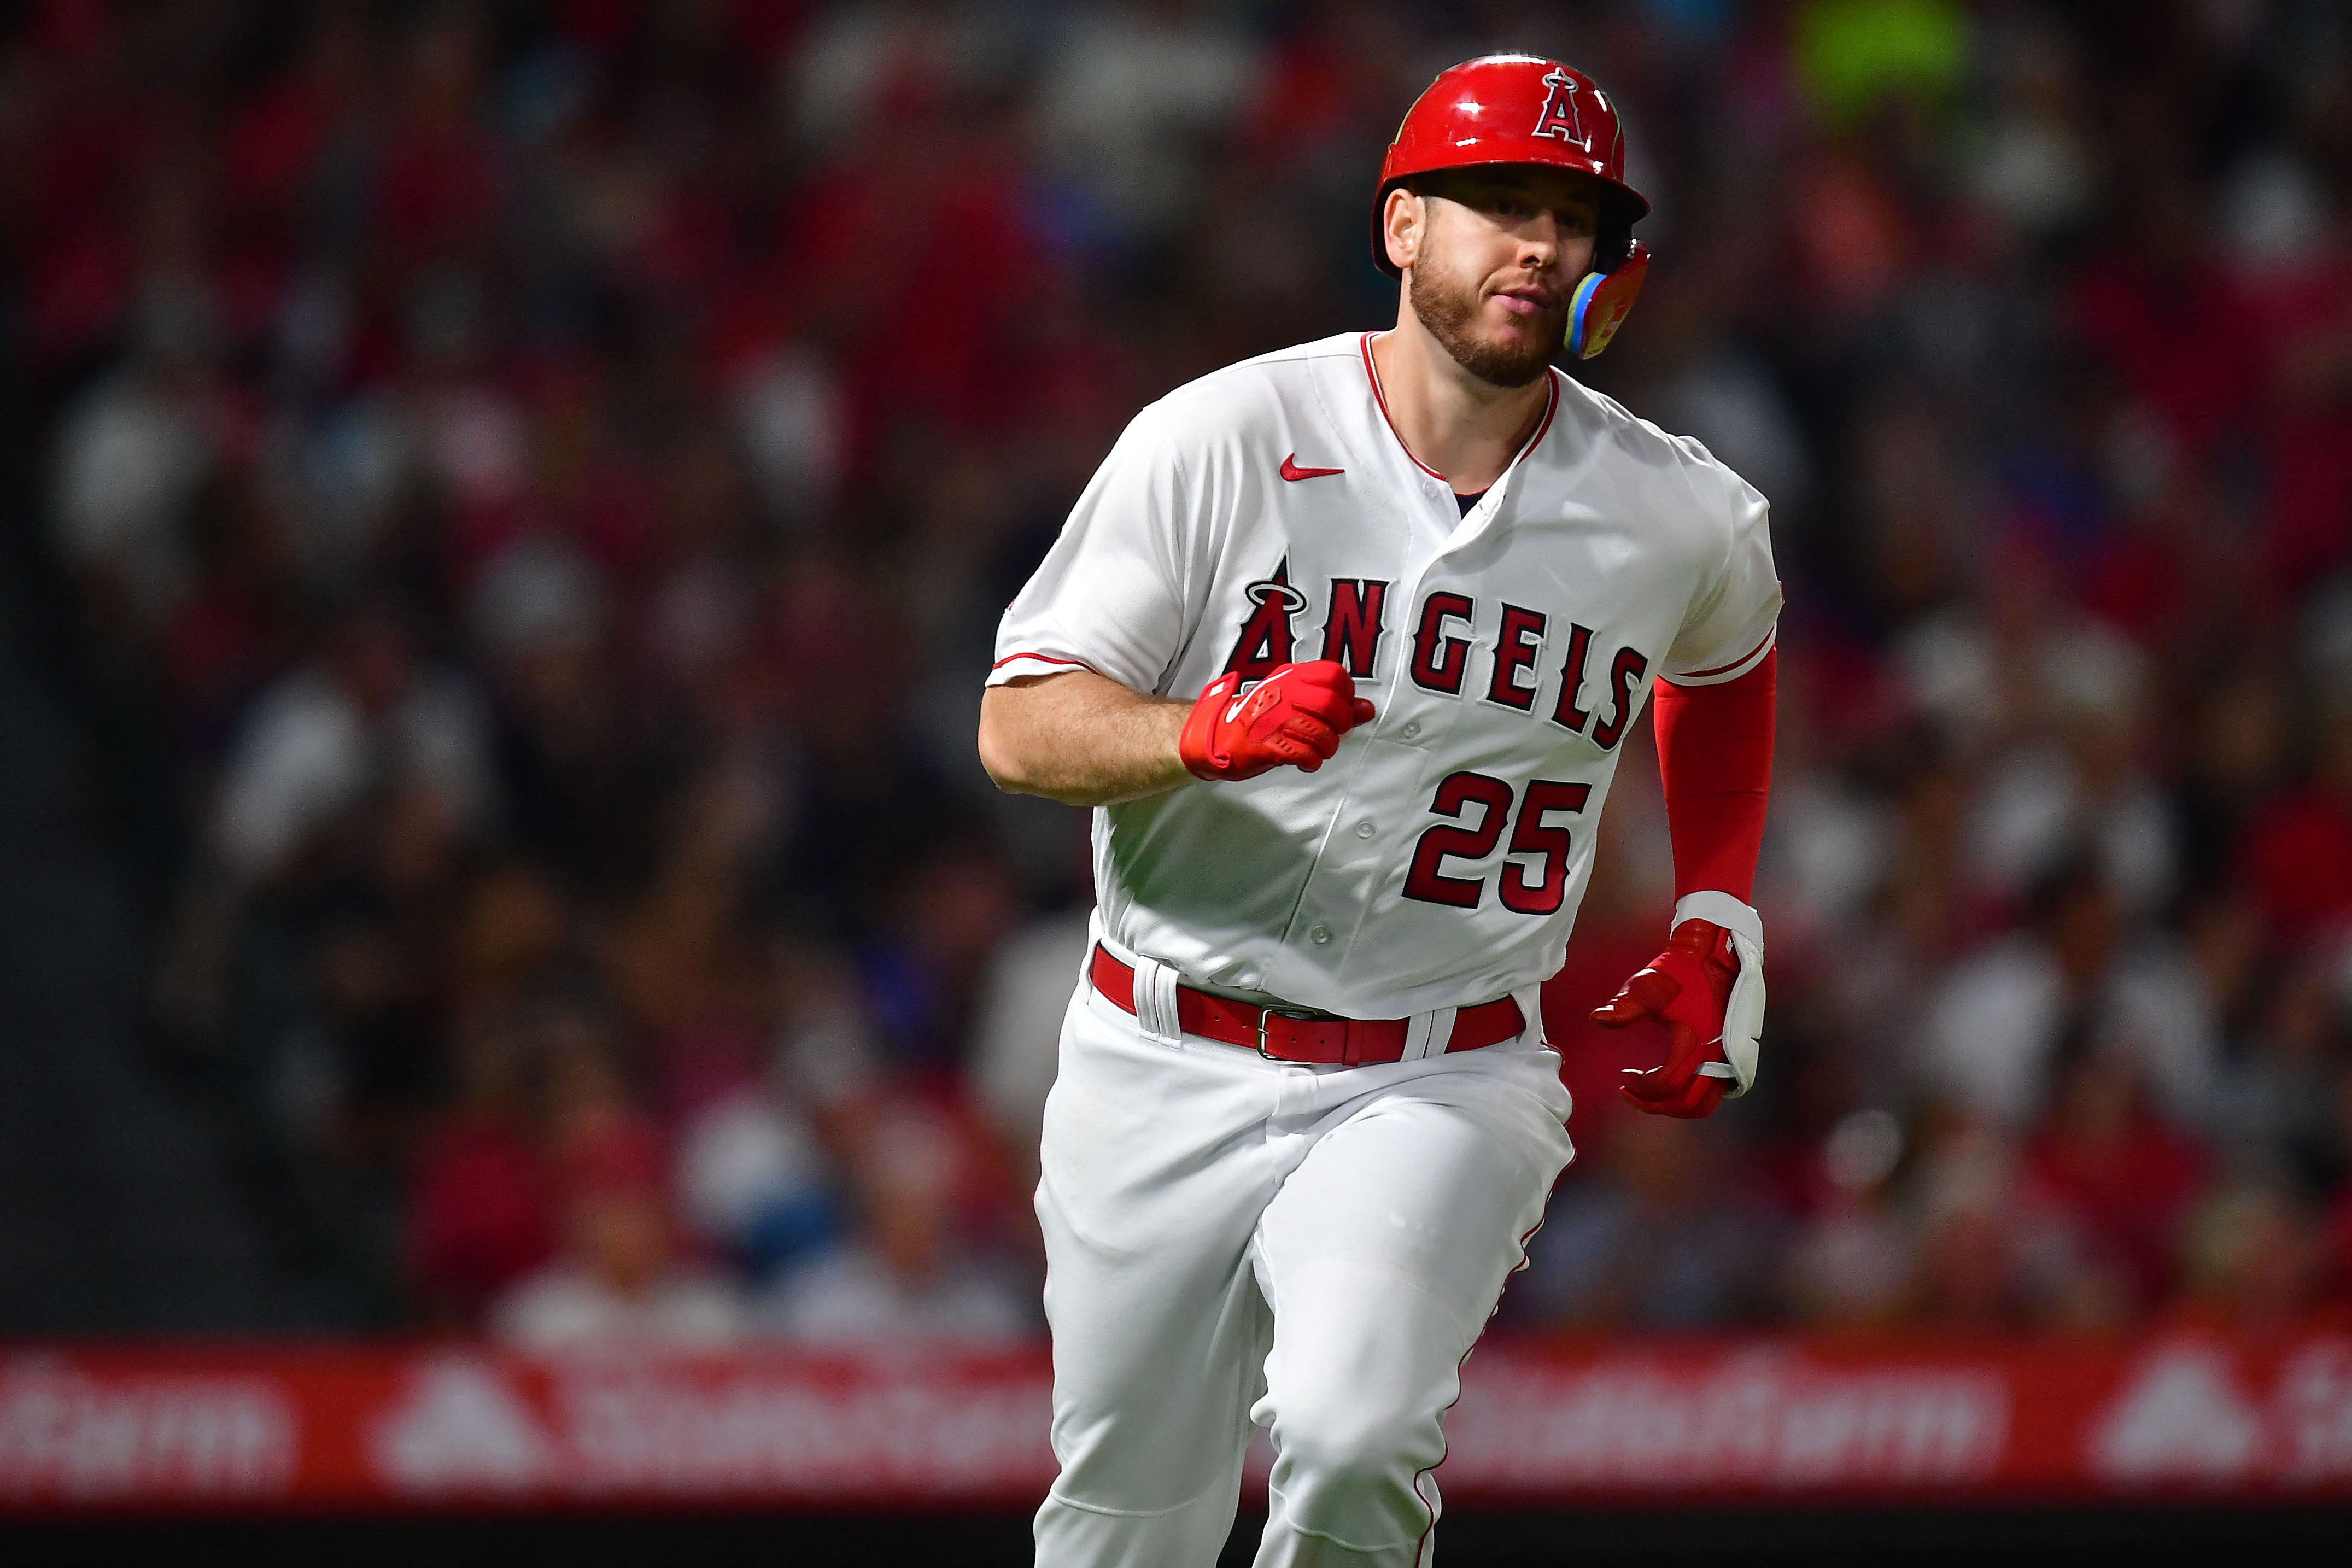 Giants score 6 runs in the 9th inning of an 8-3 win, sending the Angels to  their 7th straight loss - The San Diego Union-Tribune